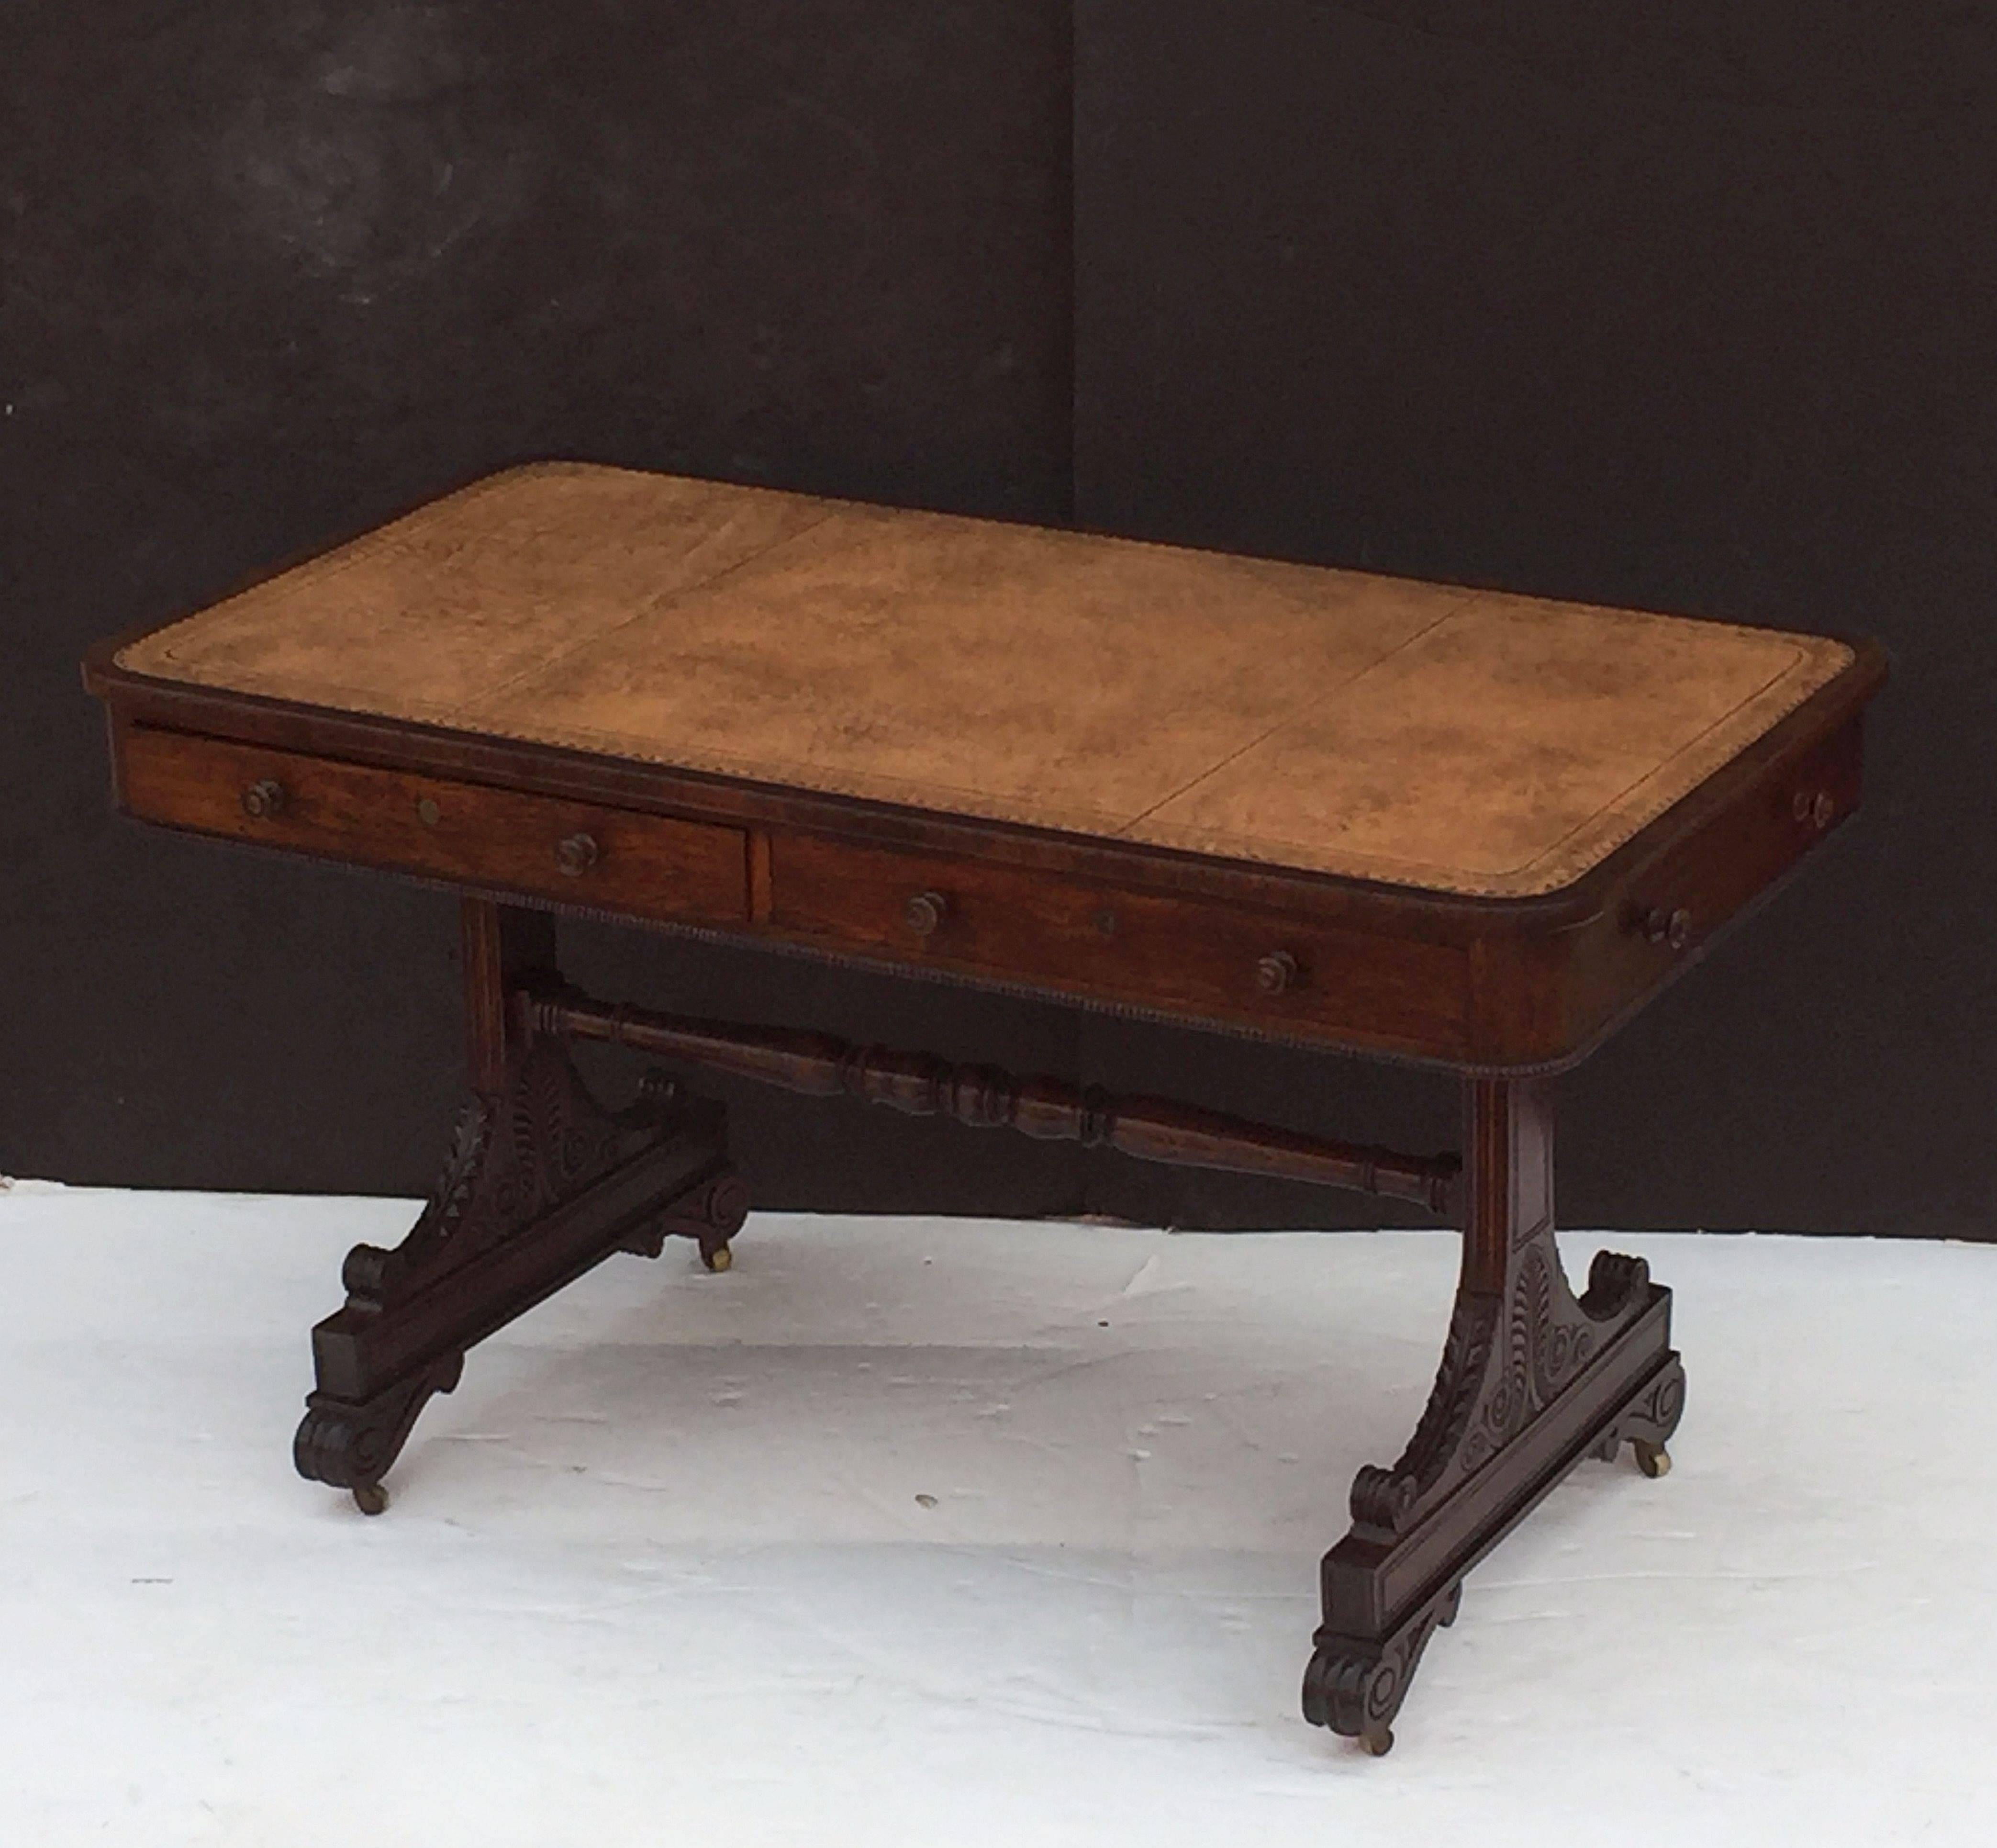 19th Century Scottish Library Table or Writing Desk with Leather Top from the Regency Era